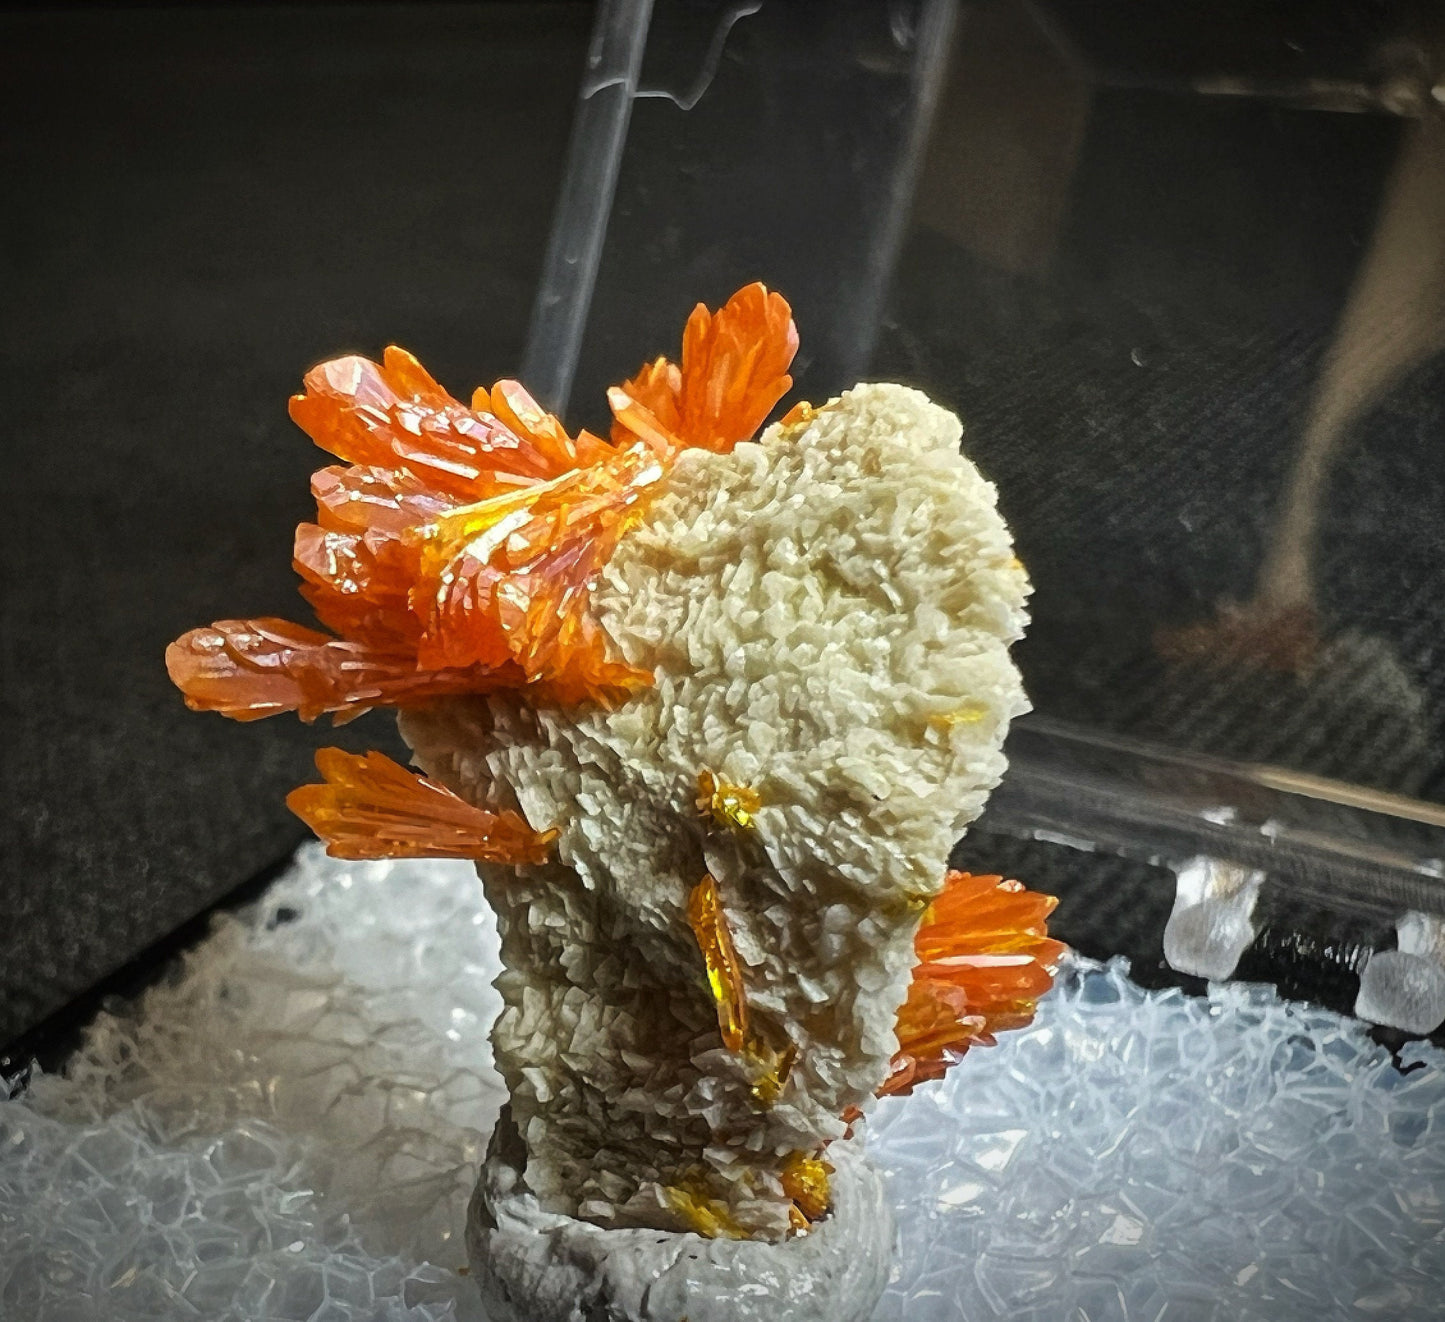 Orpiment On Barite From El'brusskiy Arsenic Mine -Collectors Piece, Home Décor, Gift (Box Included)